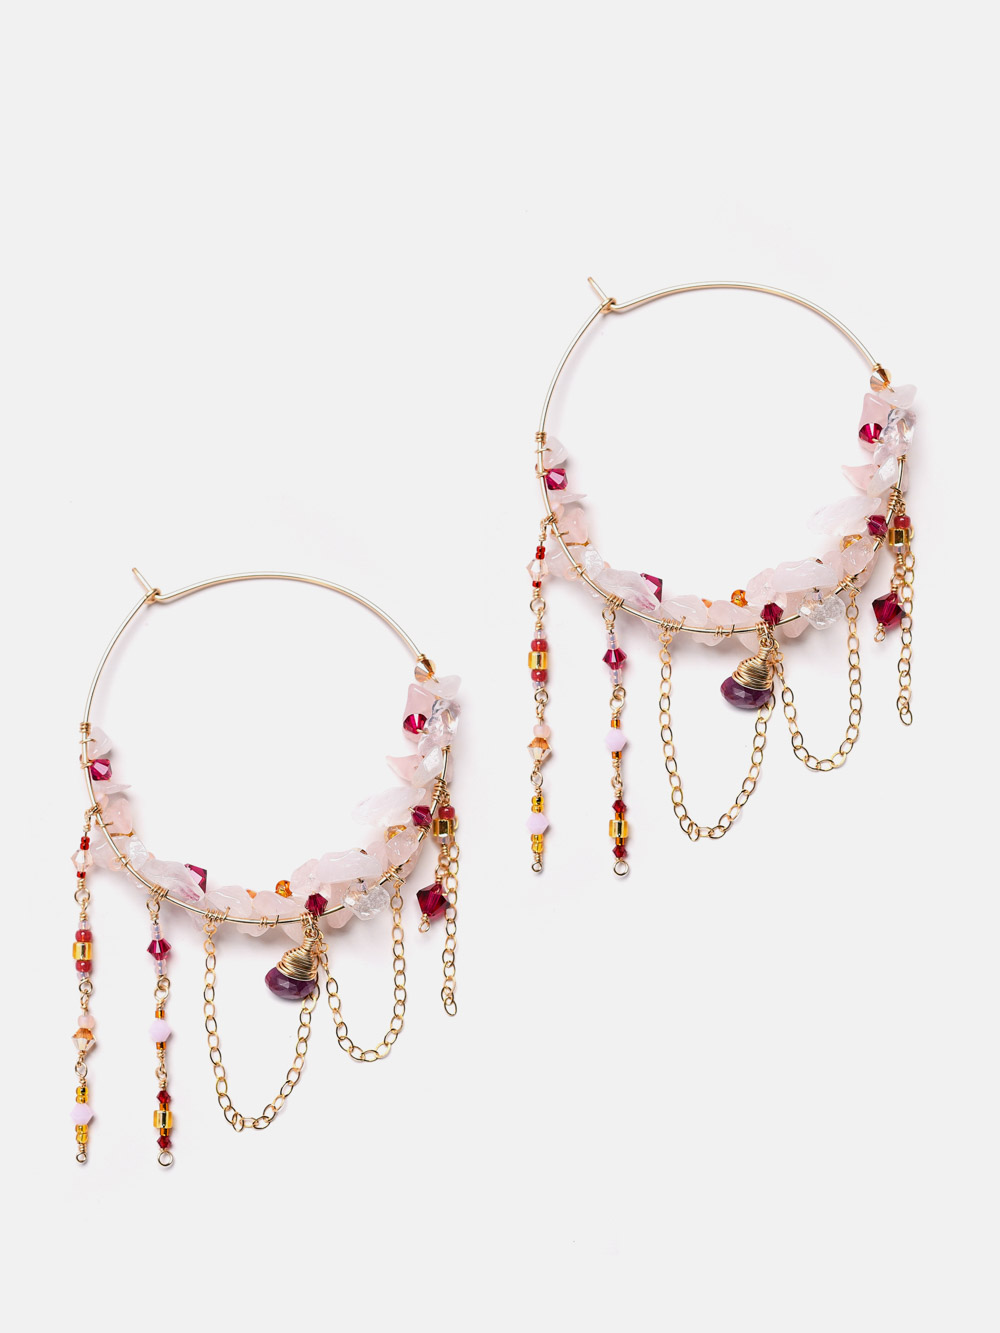 14k gold filled hoop earrings with gemstones and chains